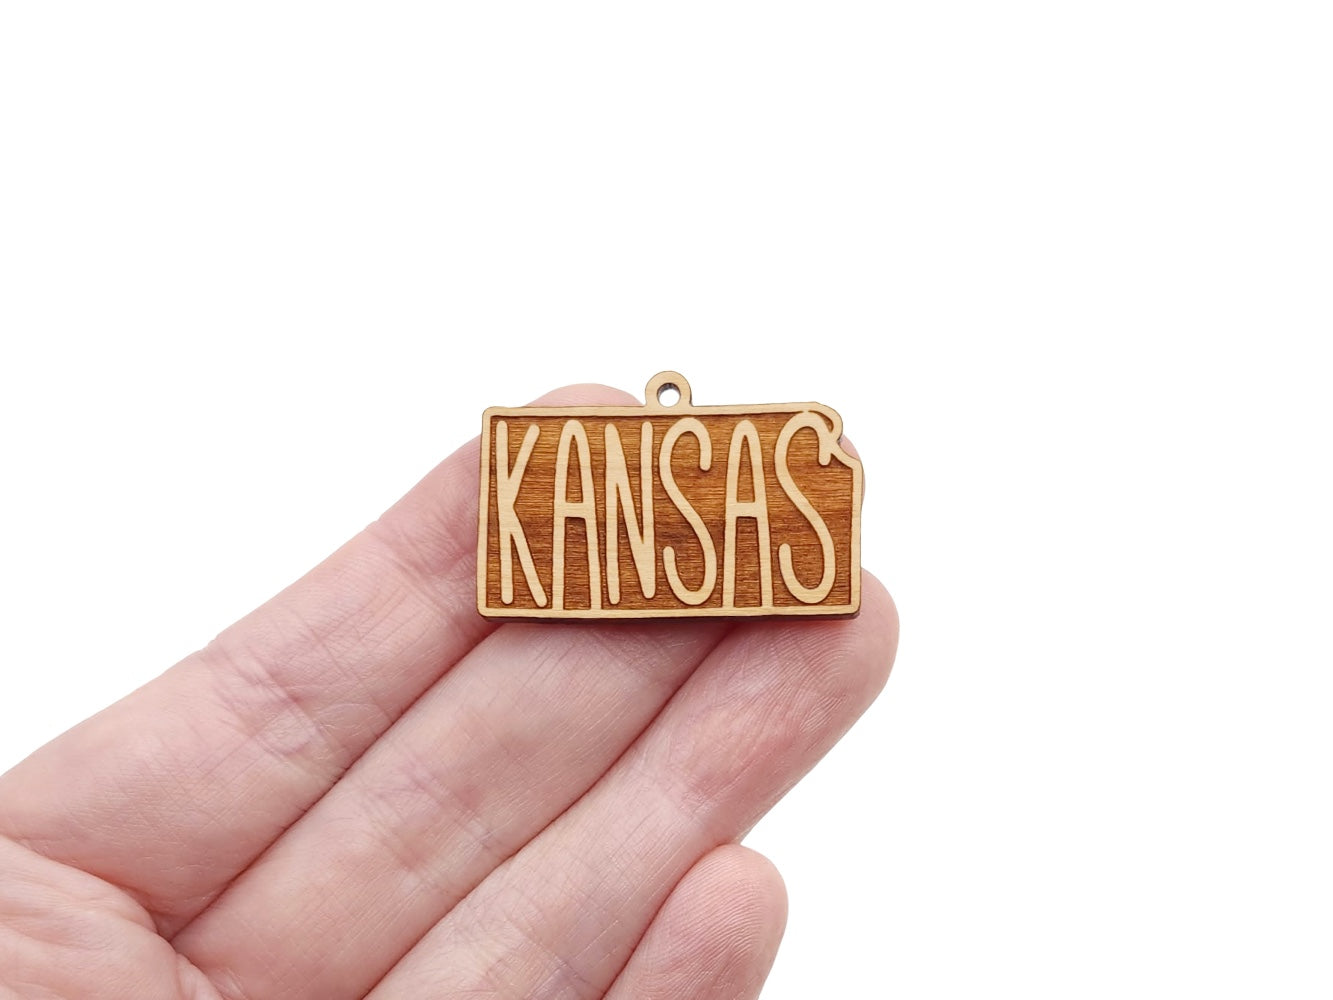 a hand holding a small wooden kansas charm